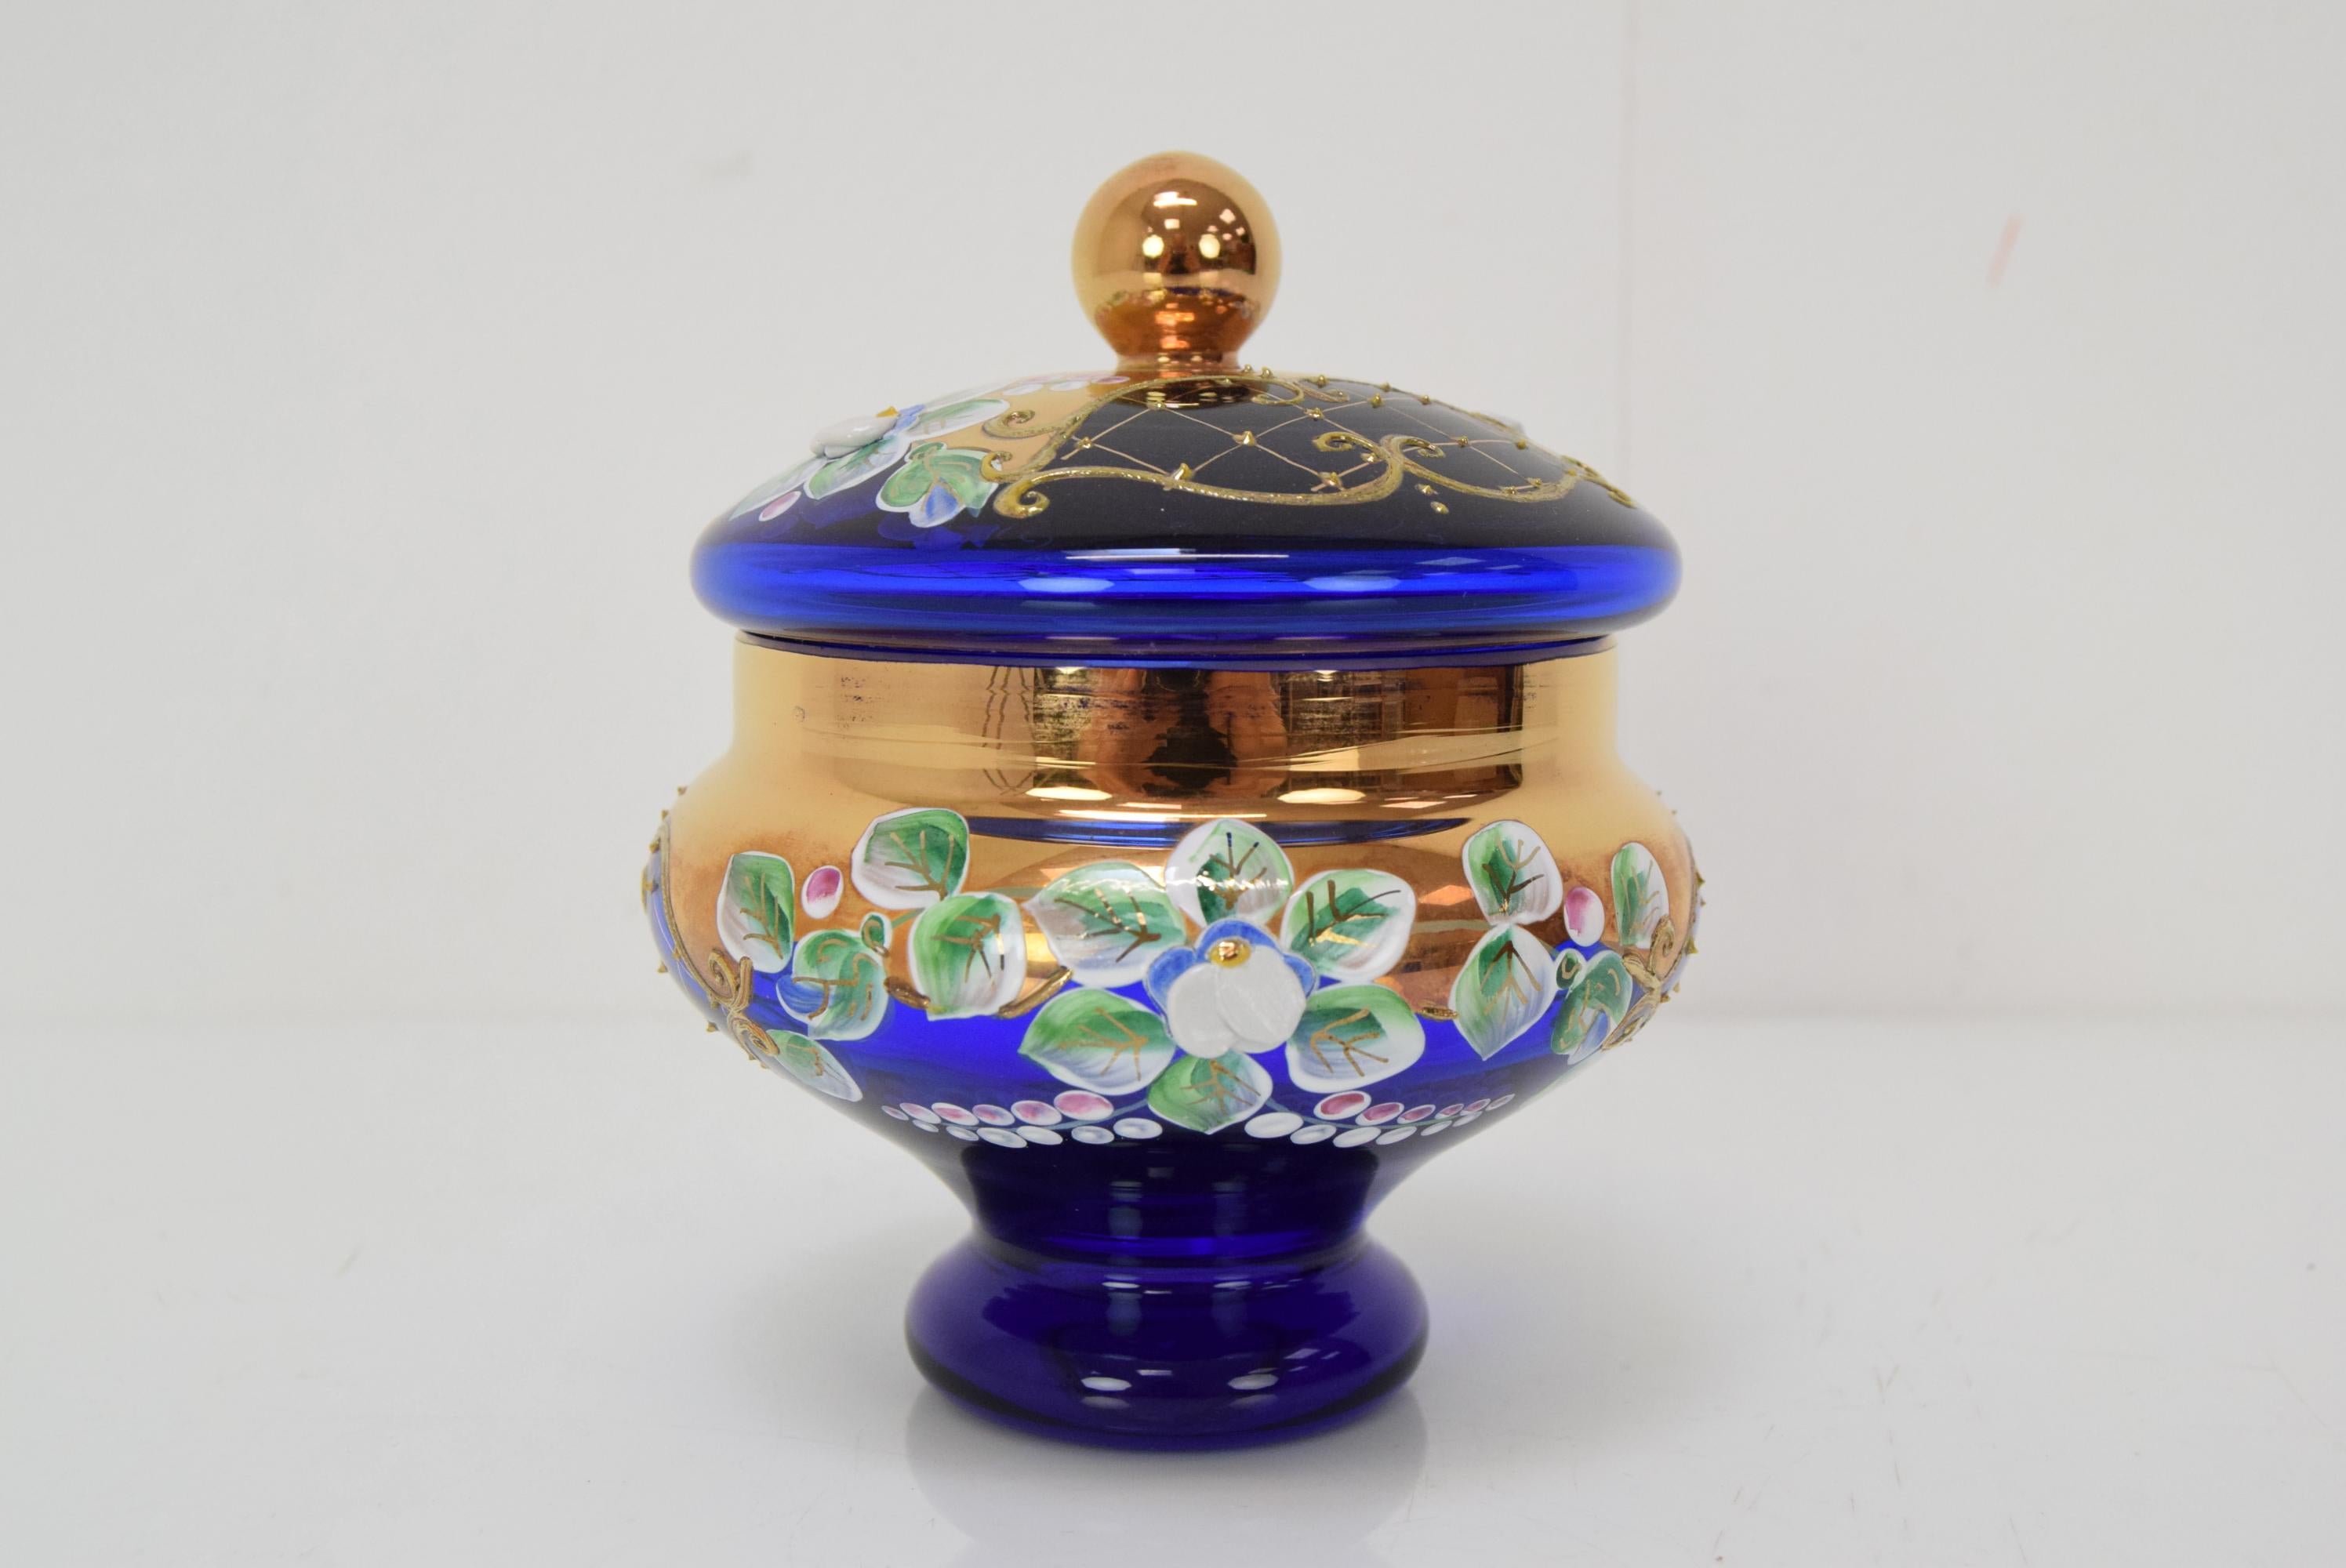 
Made in Czechoslovakia
Made of Art Glass,Smalt
Re-polished
Good Original Condition